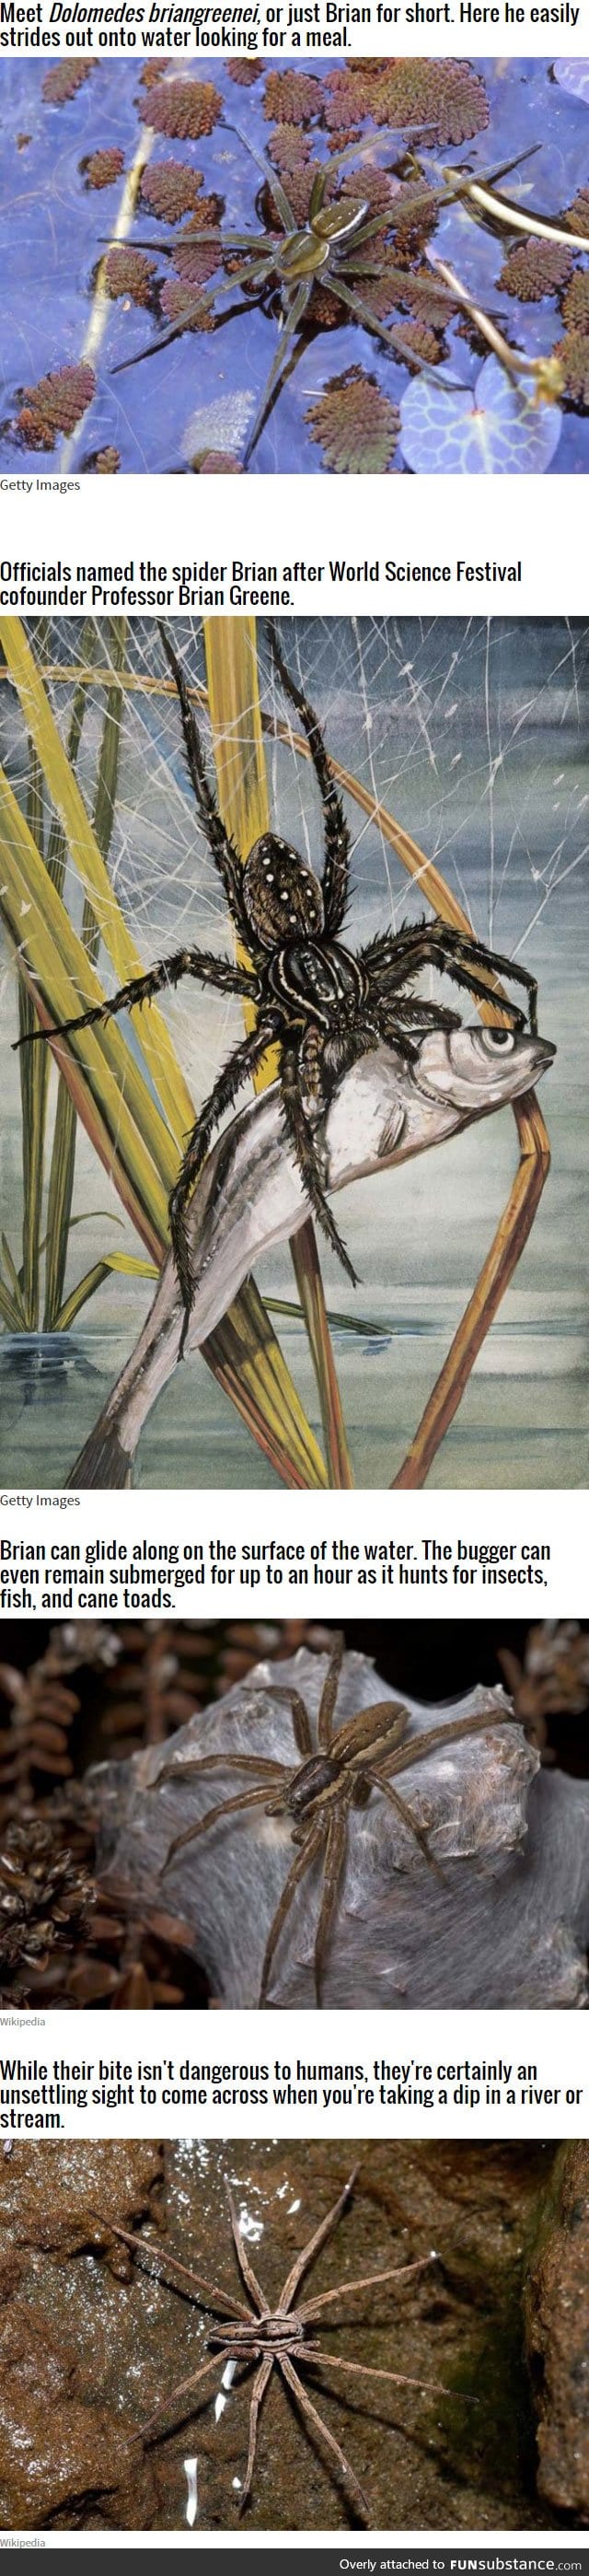 This Australian Spider Can Walk On Water And Hunt For Fish